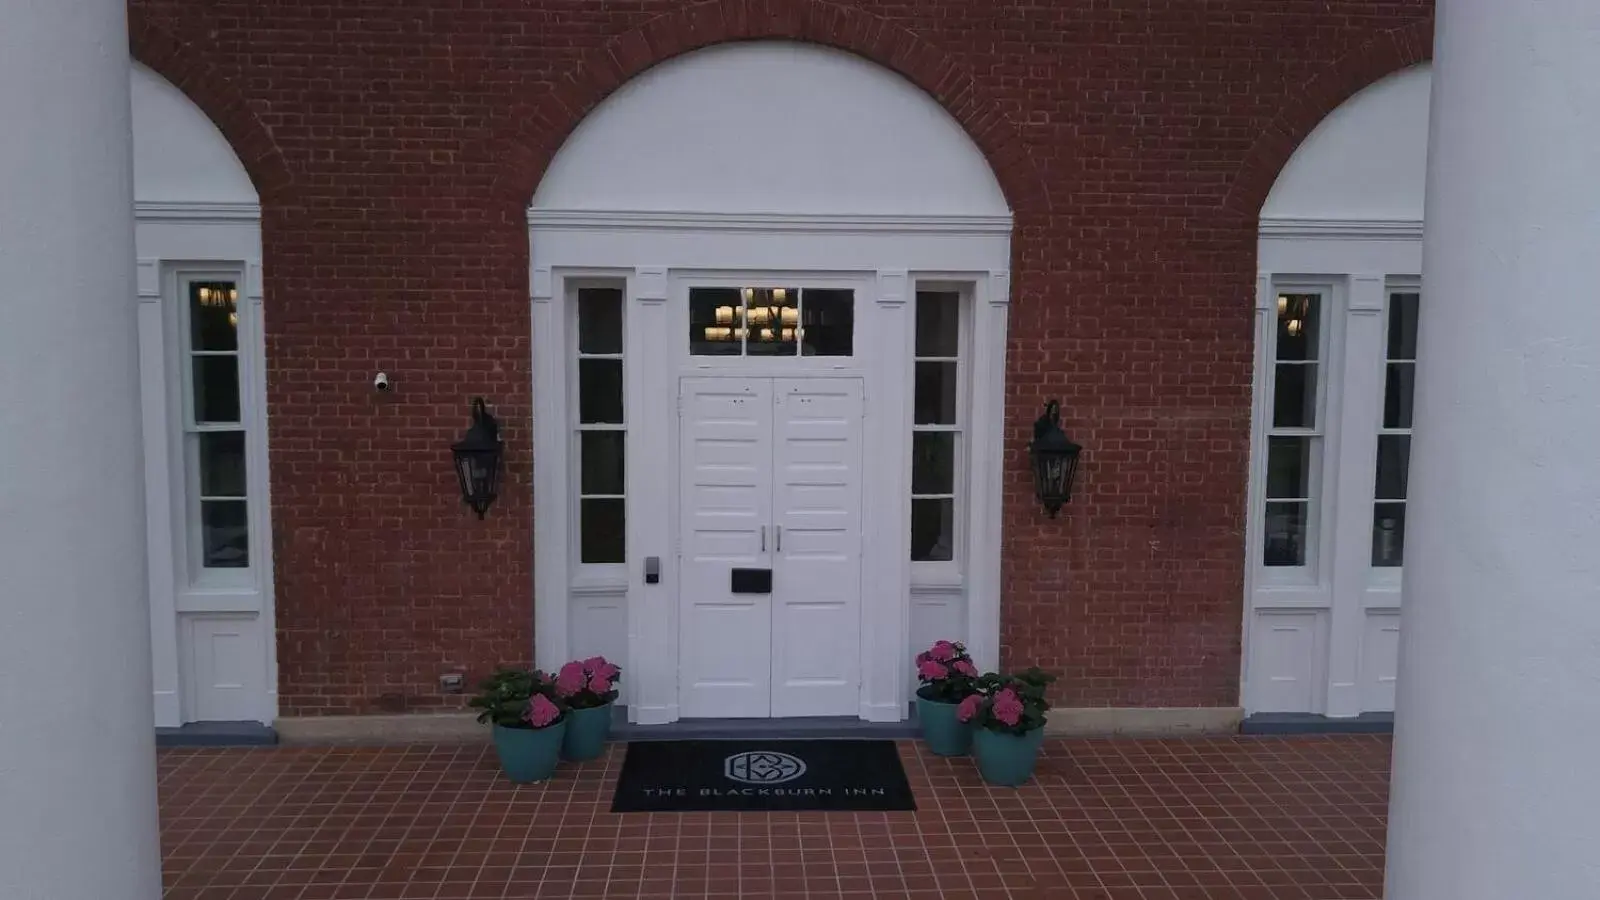 Facade/entrance in The Blackburn Inn and Conference Center